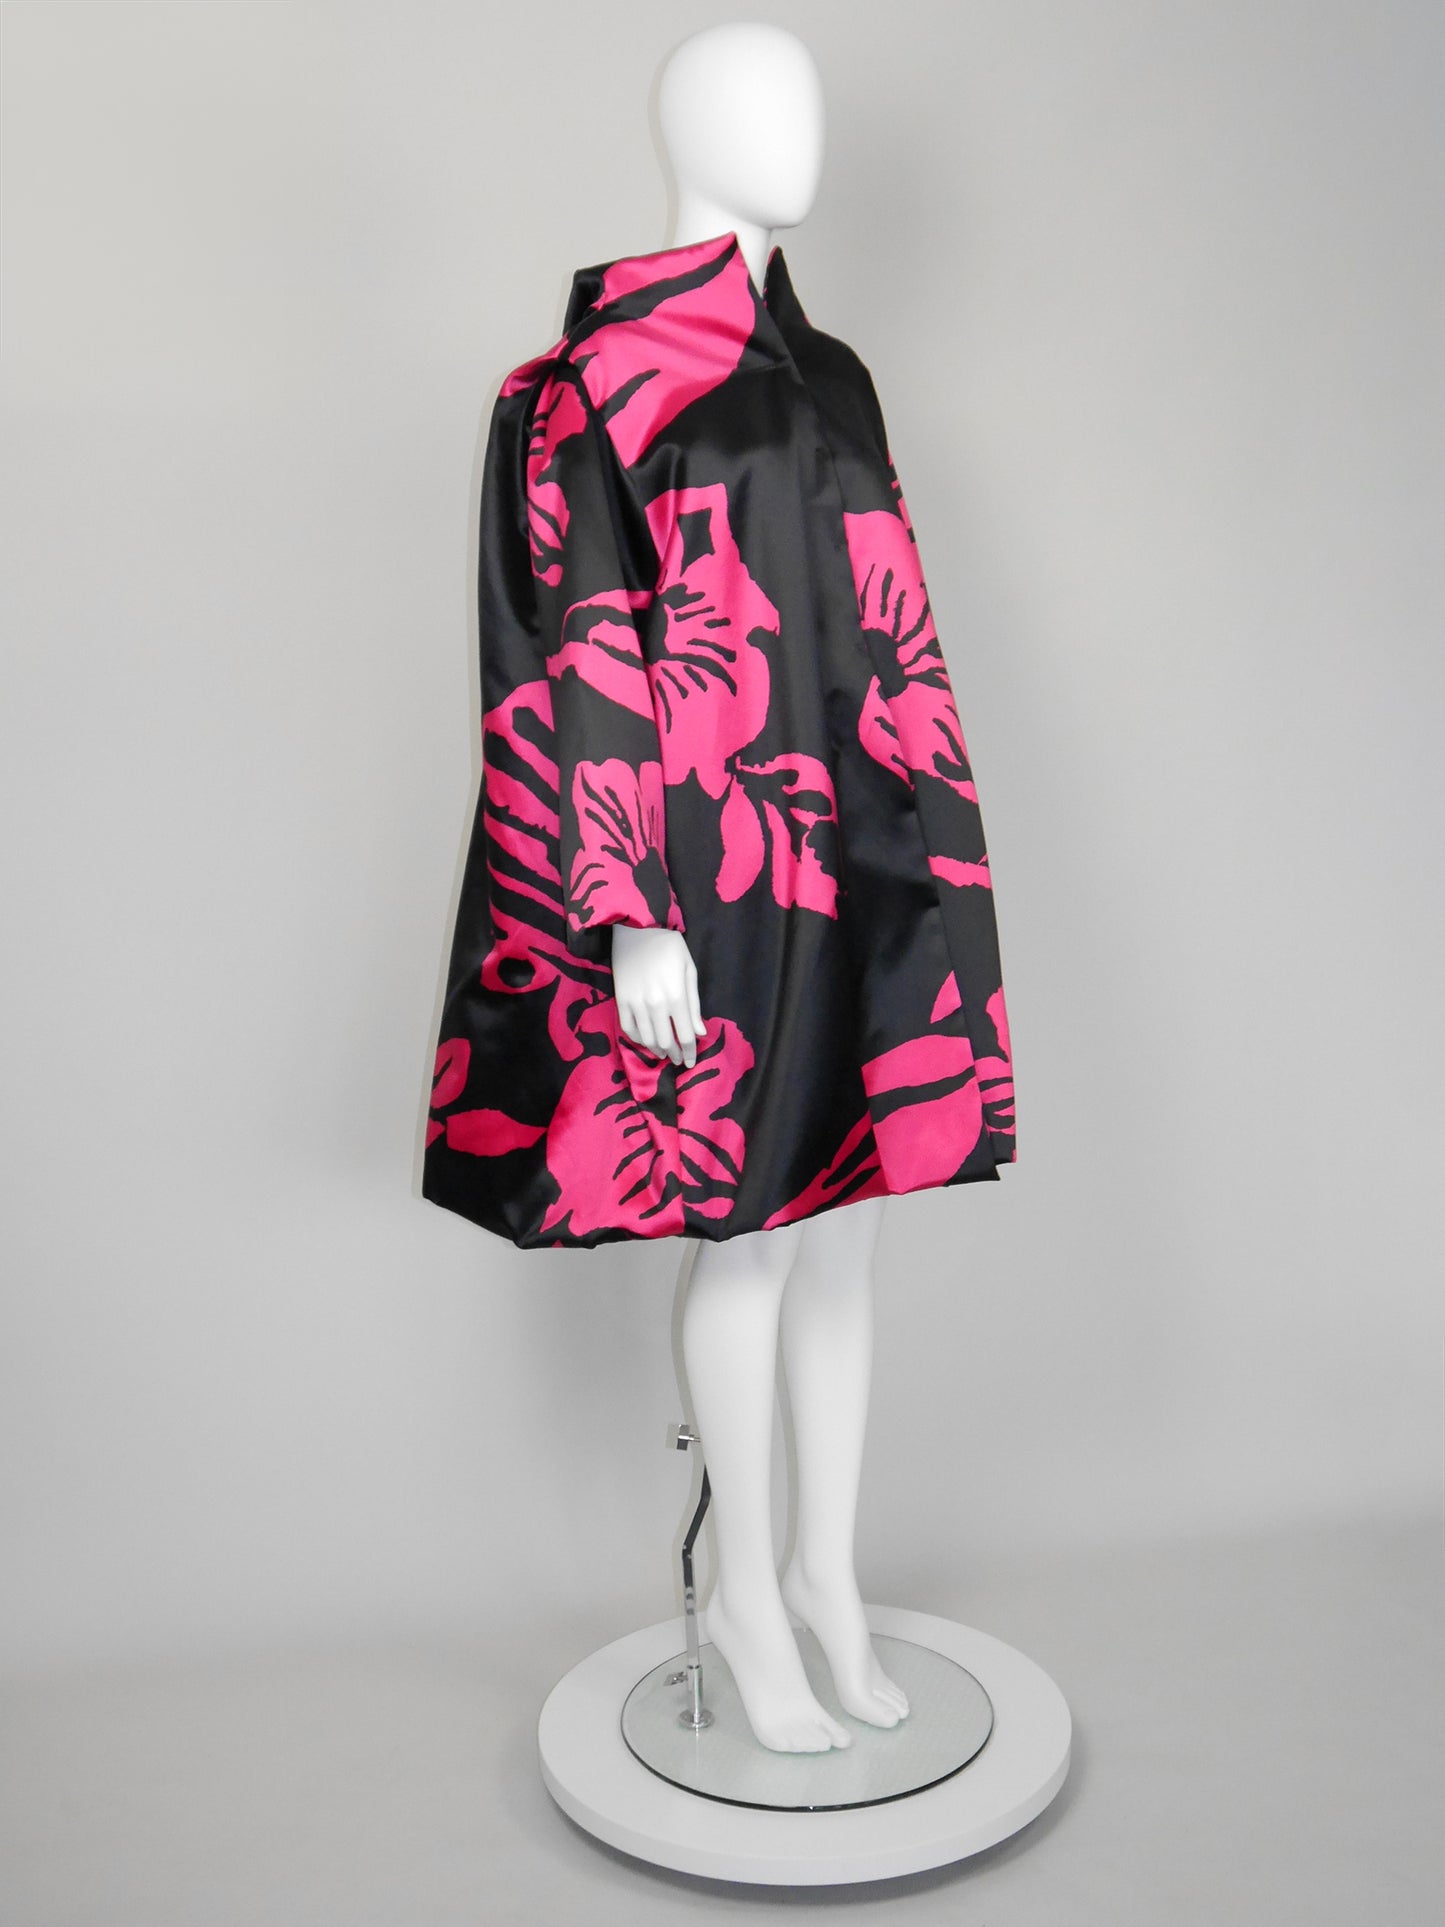 CHRISTIAN LACROIX Fall 1999 Vintage Oversized Floral Silk Evening Coat One-Size